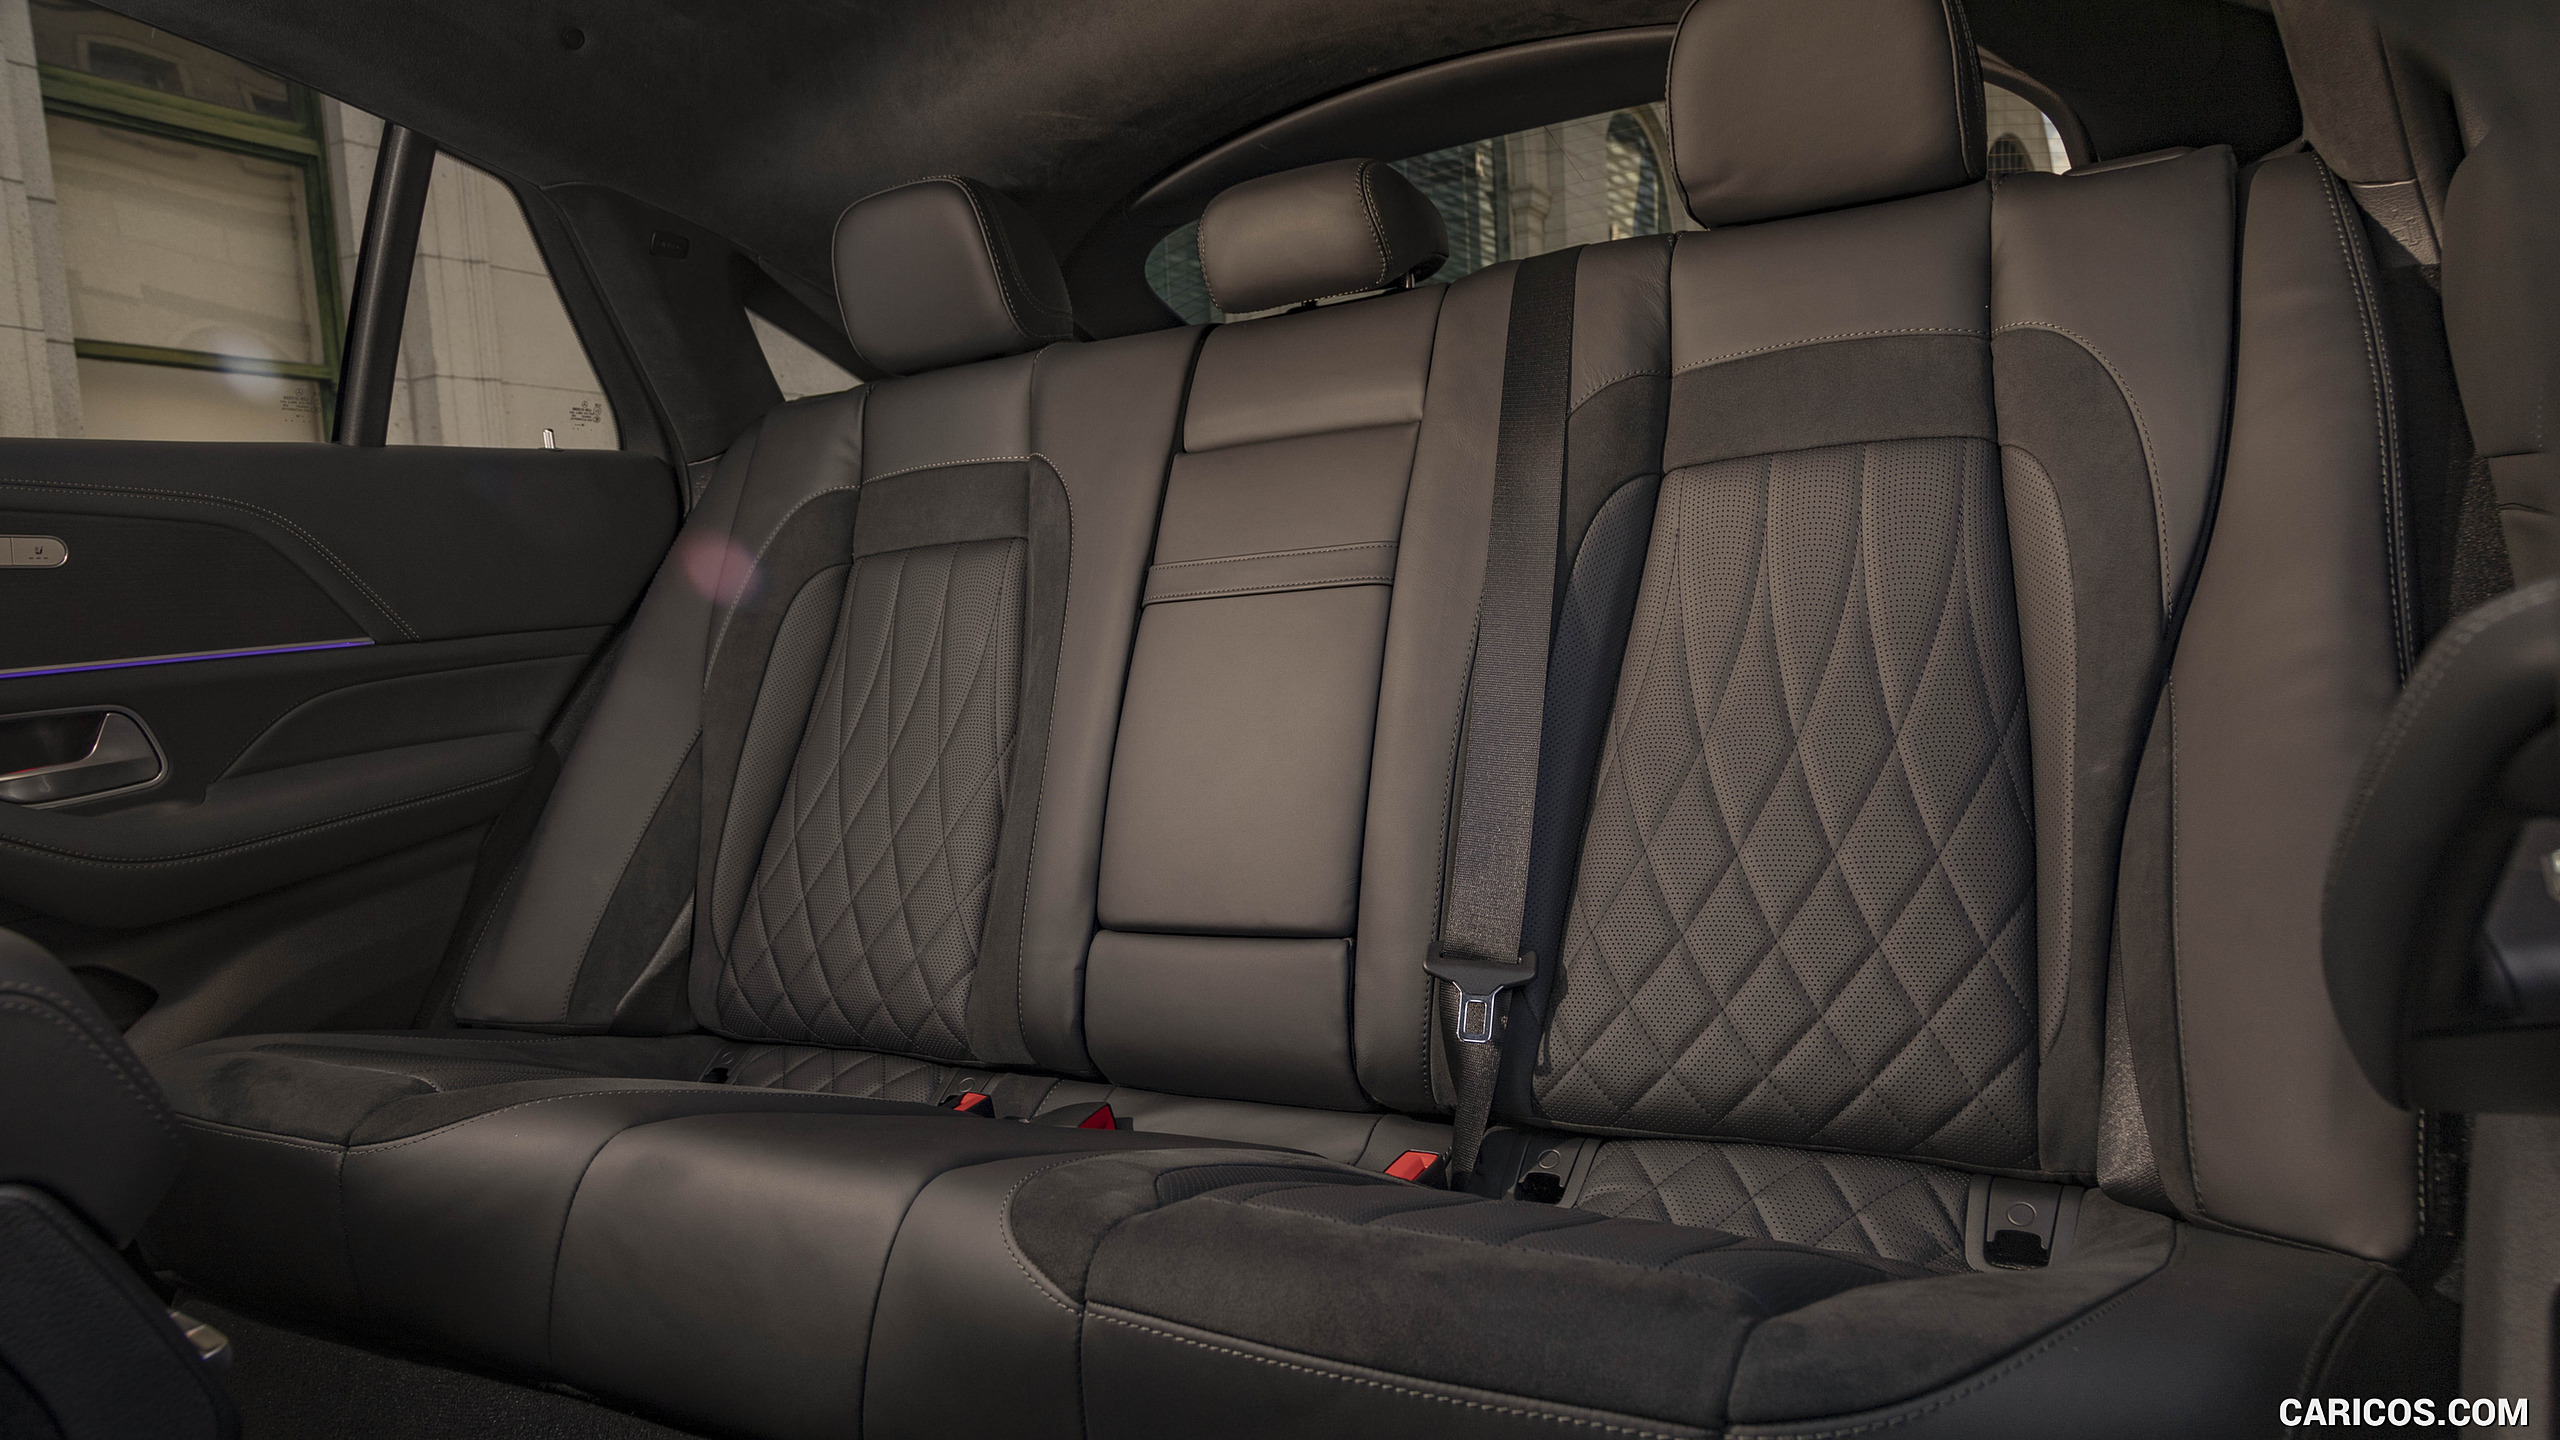 2021 Mercedes-AMG GLE 53 Coupe - Interior, Rear Seats, #178 of 178